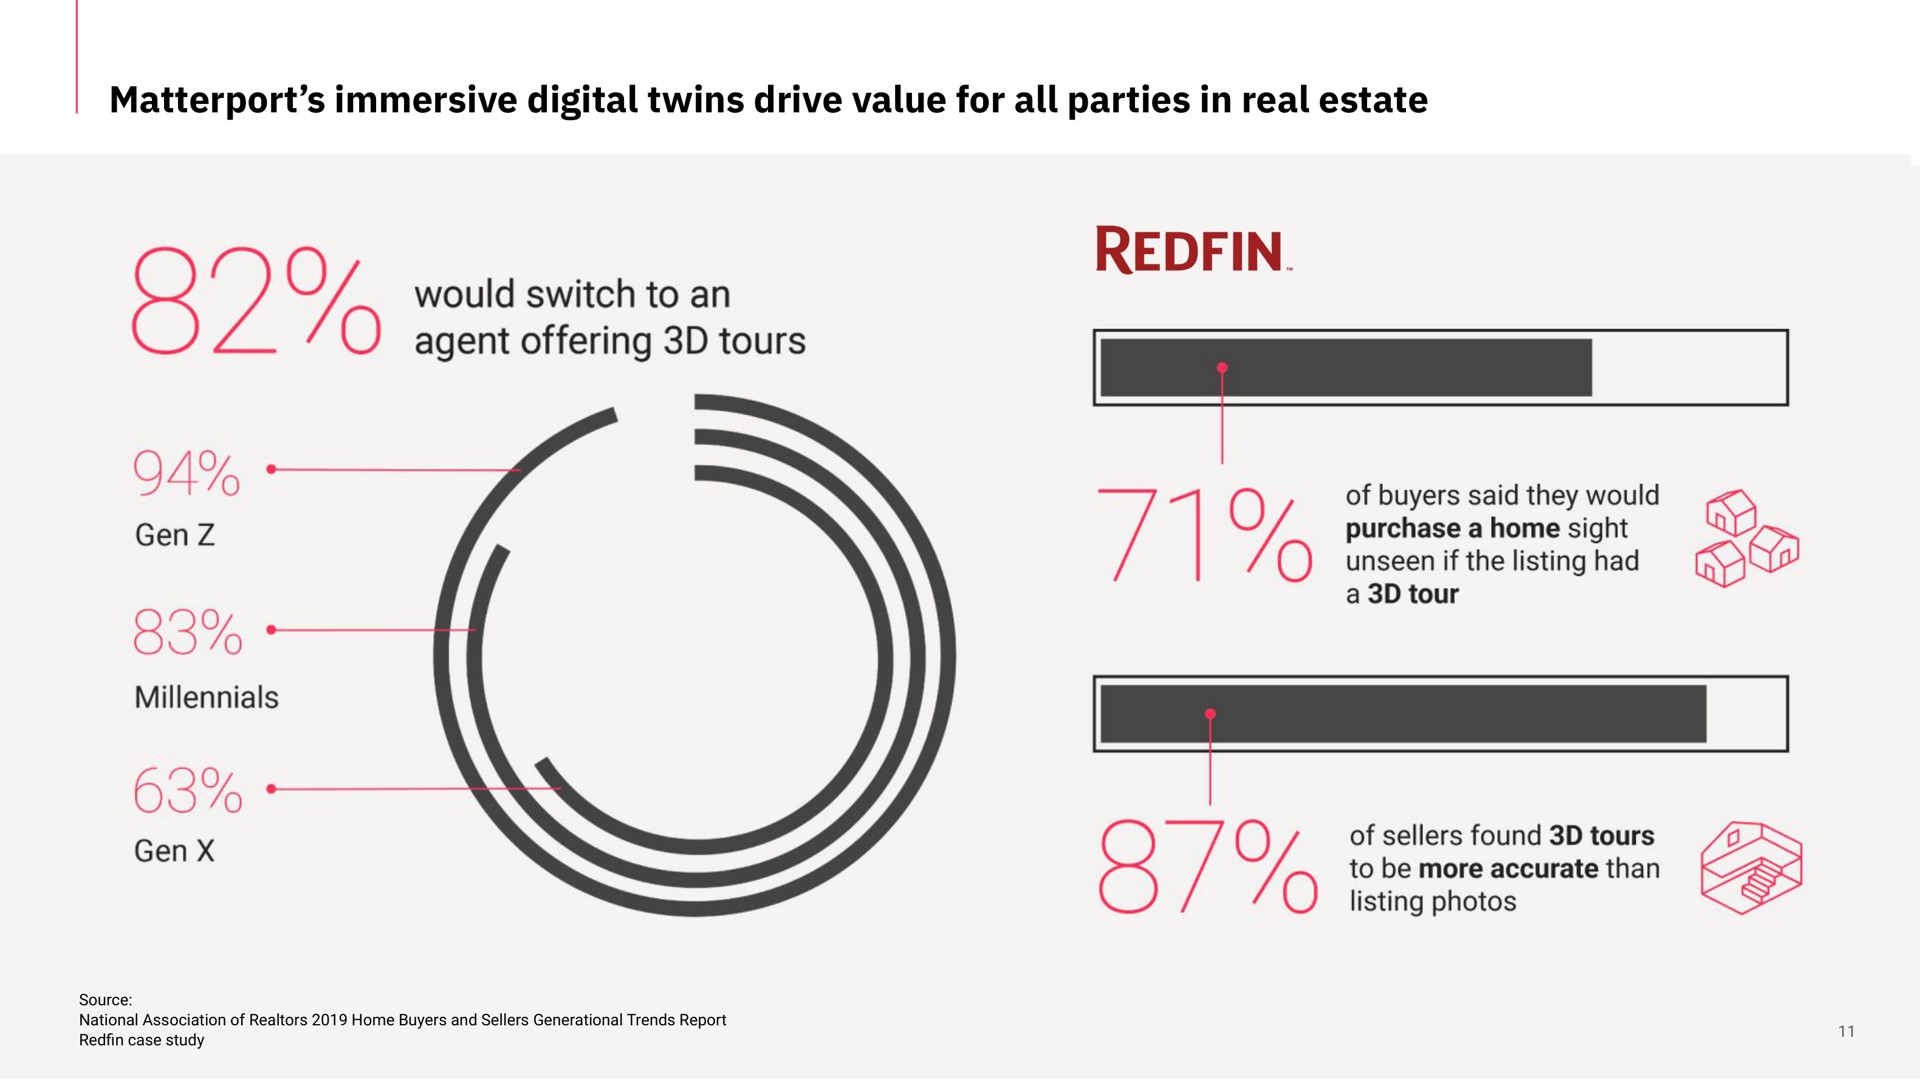 immersive digital twins drive value for all parties in real estate would switch to an agent offering tours redfin | Matterport